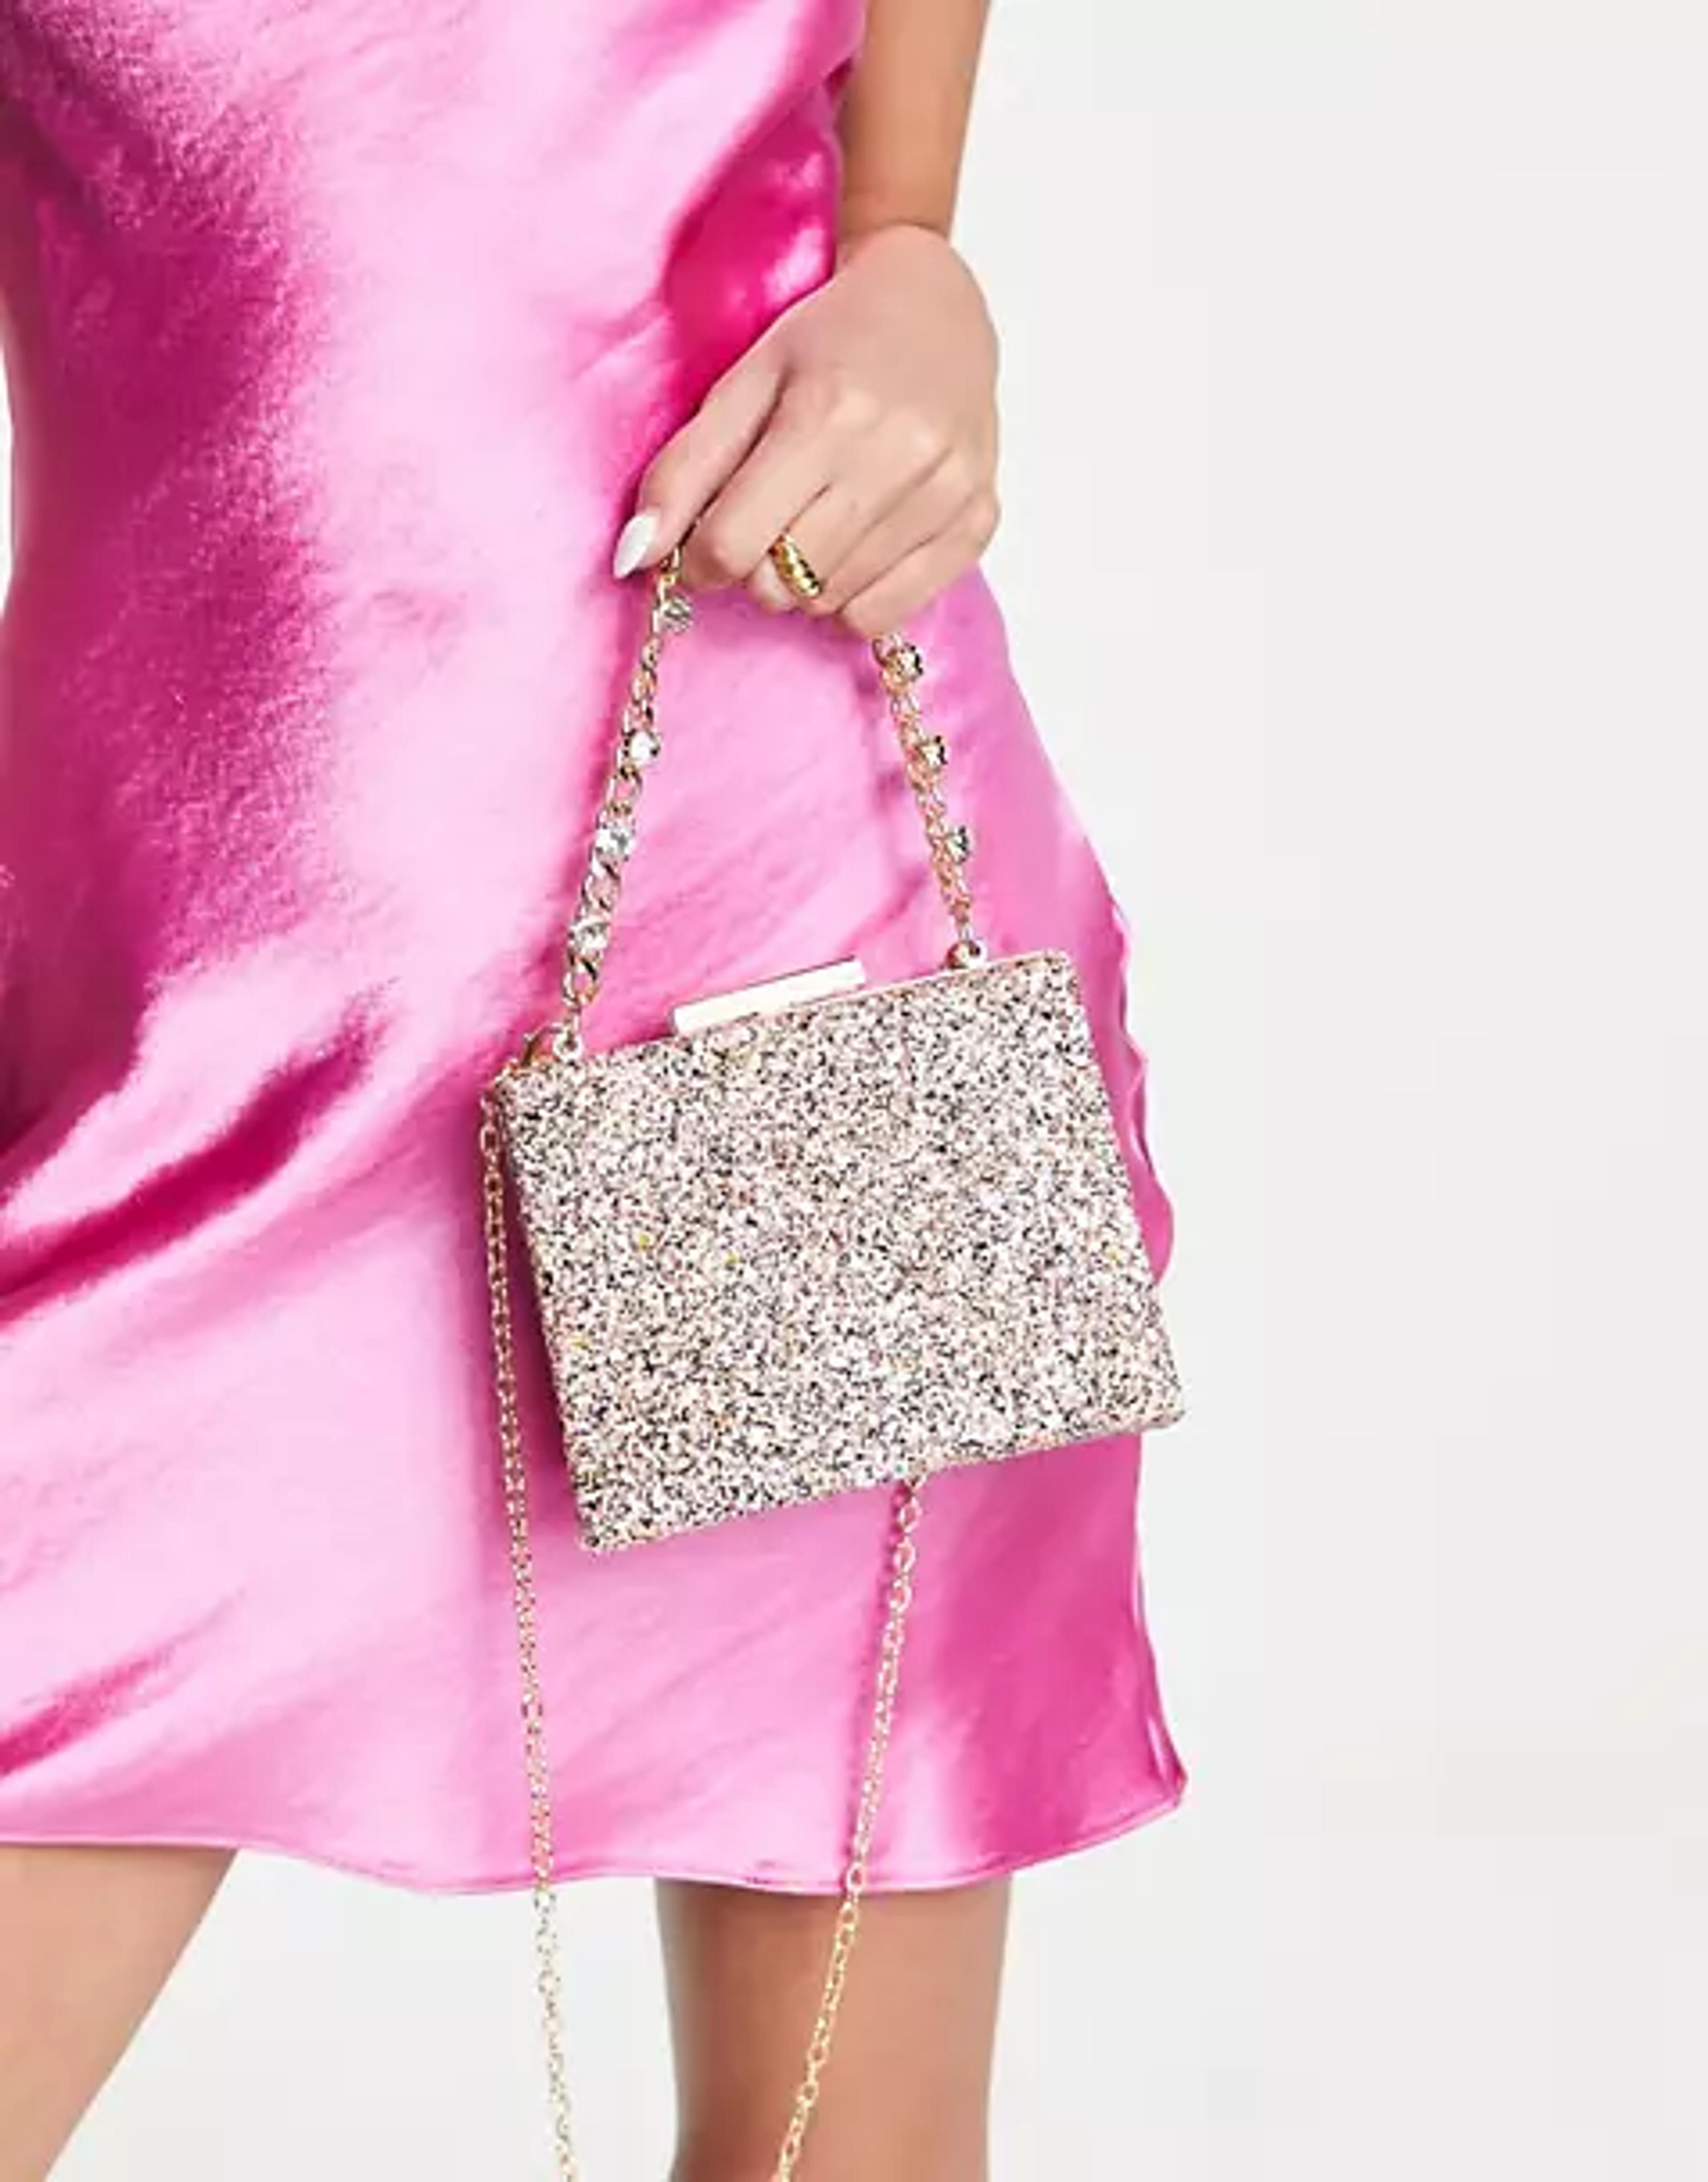 True Decadence clutch bag in pink glitter with chunky chain grab handle | ASOS